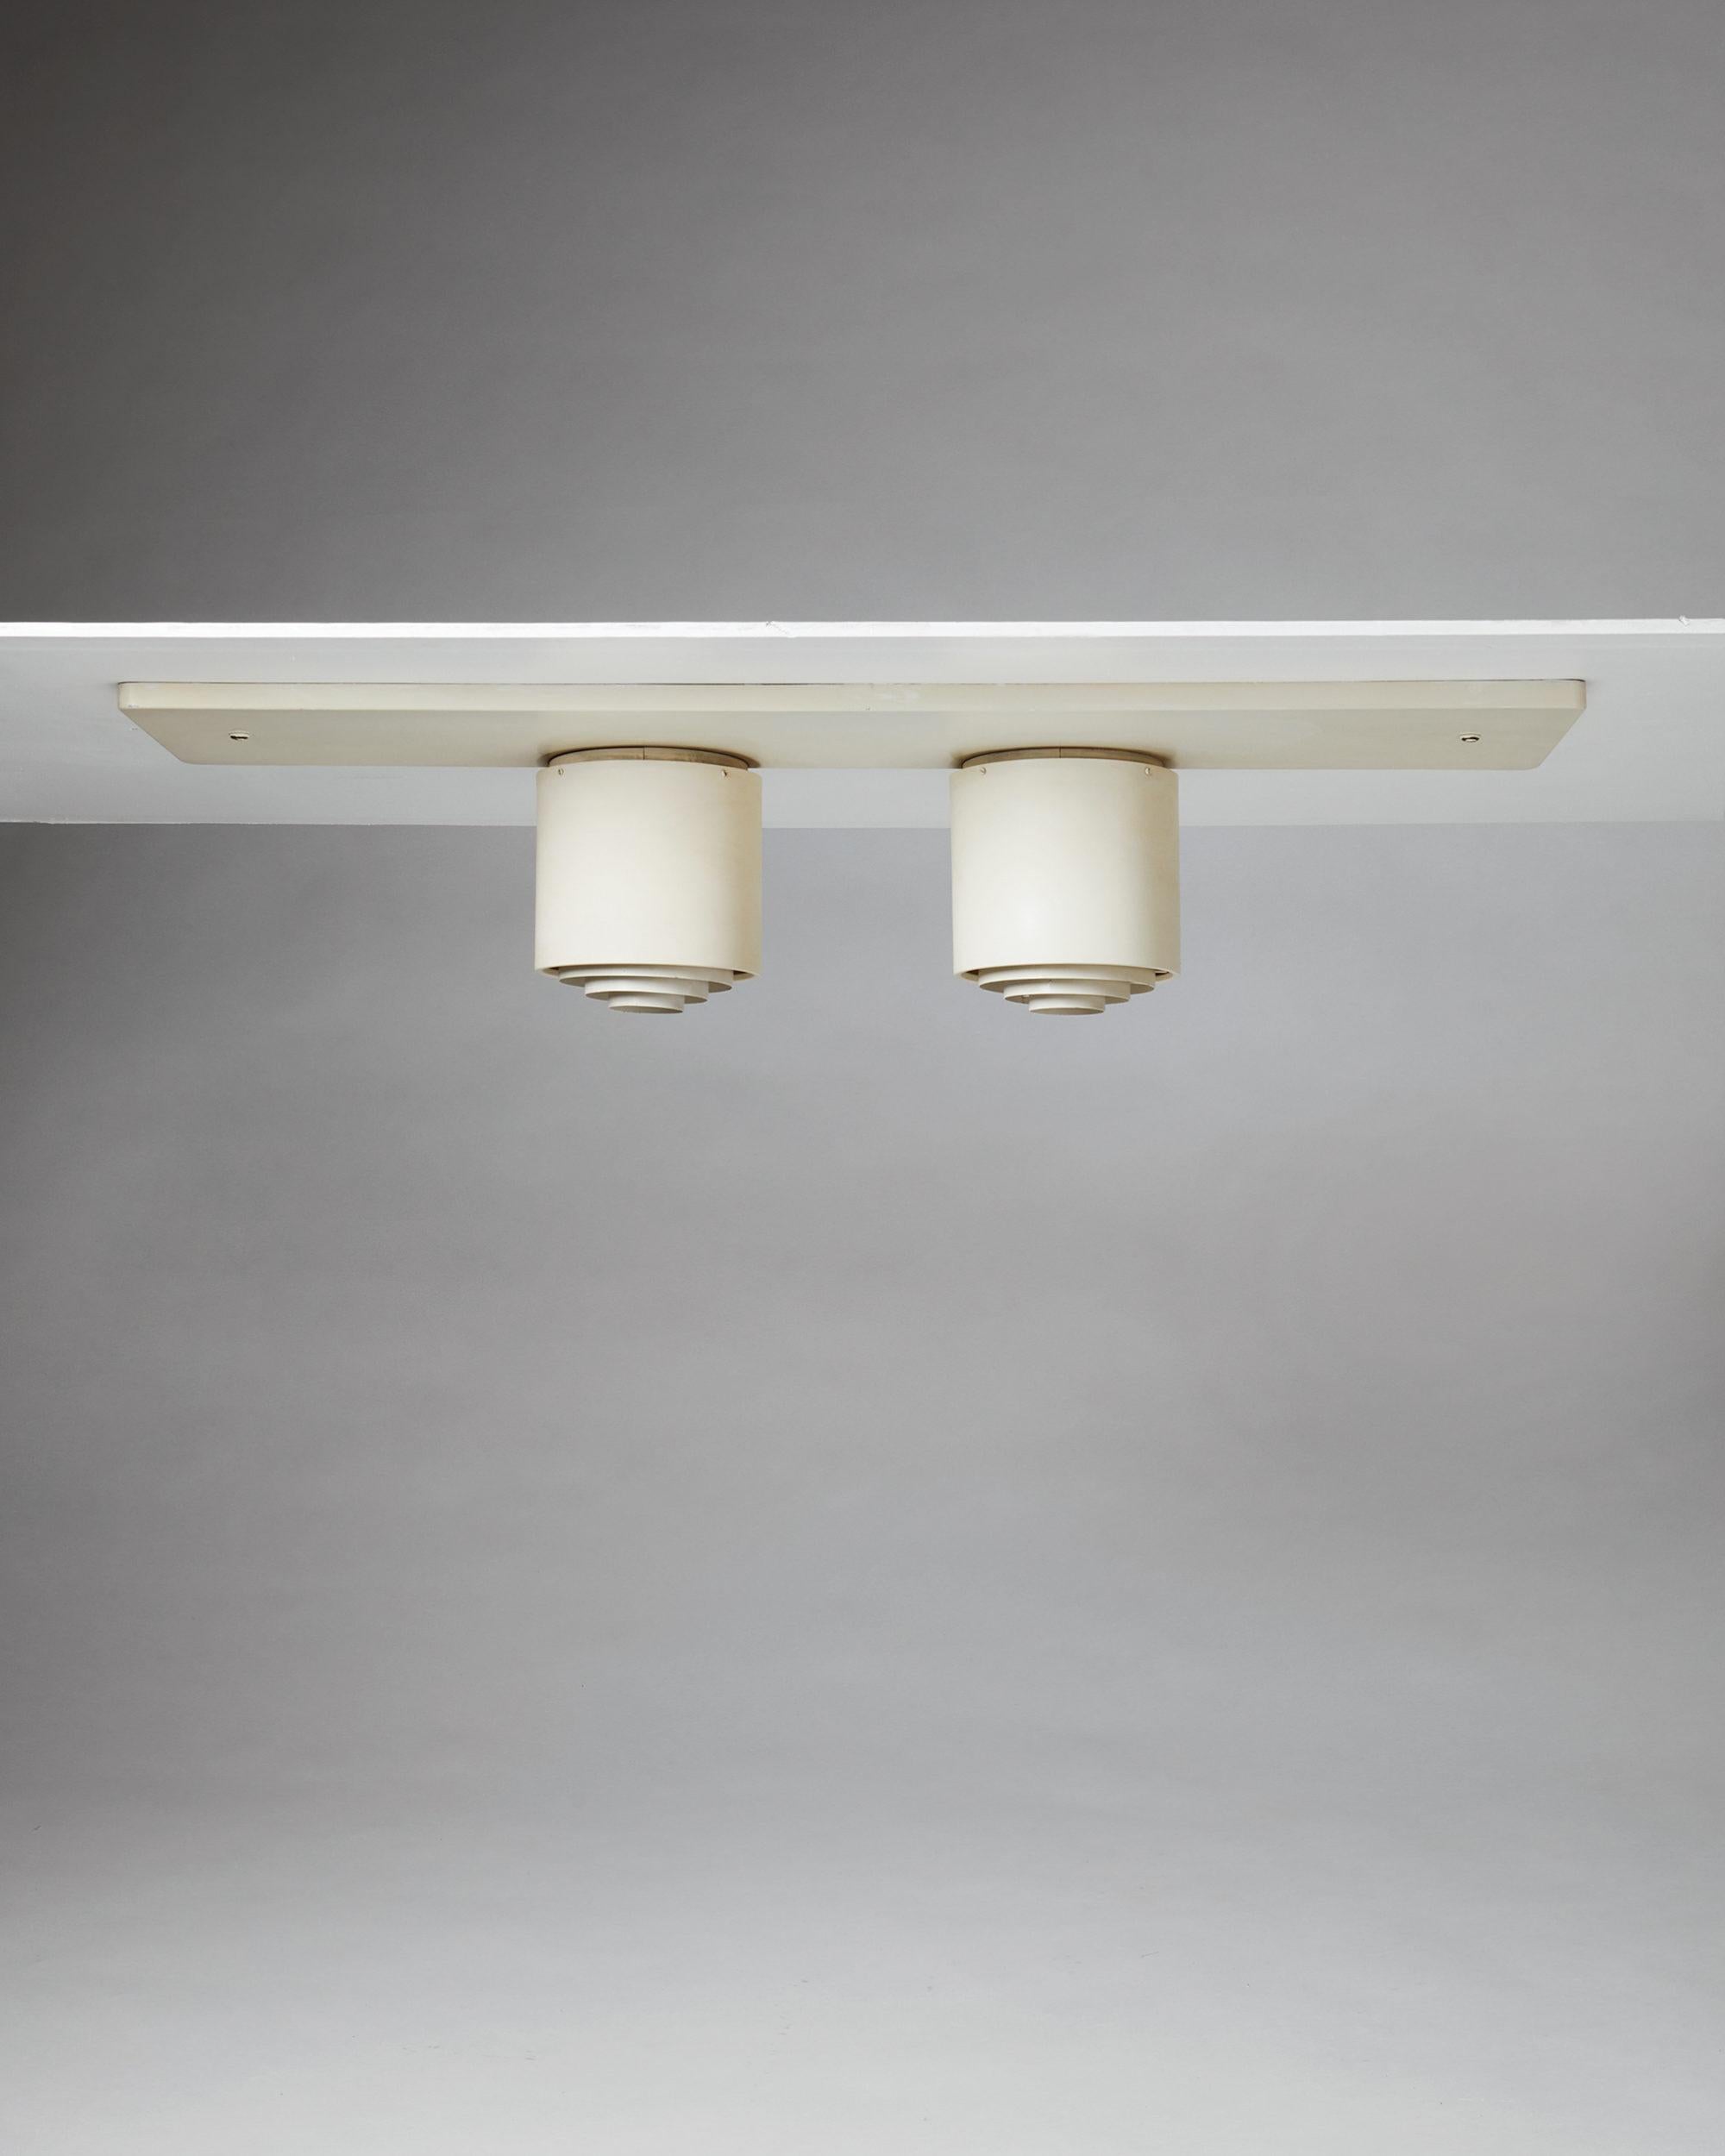 Ceiling lamp designed by Alvar Aalto for Idman,
Finland. 1950s

Lacquered metal.

H: 21 cm / 8 1/8